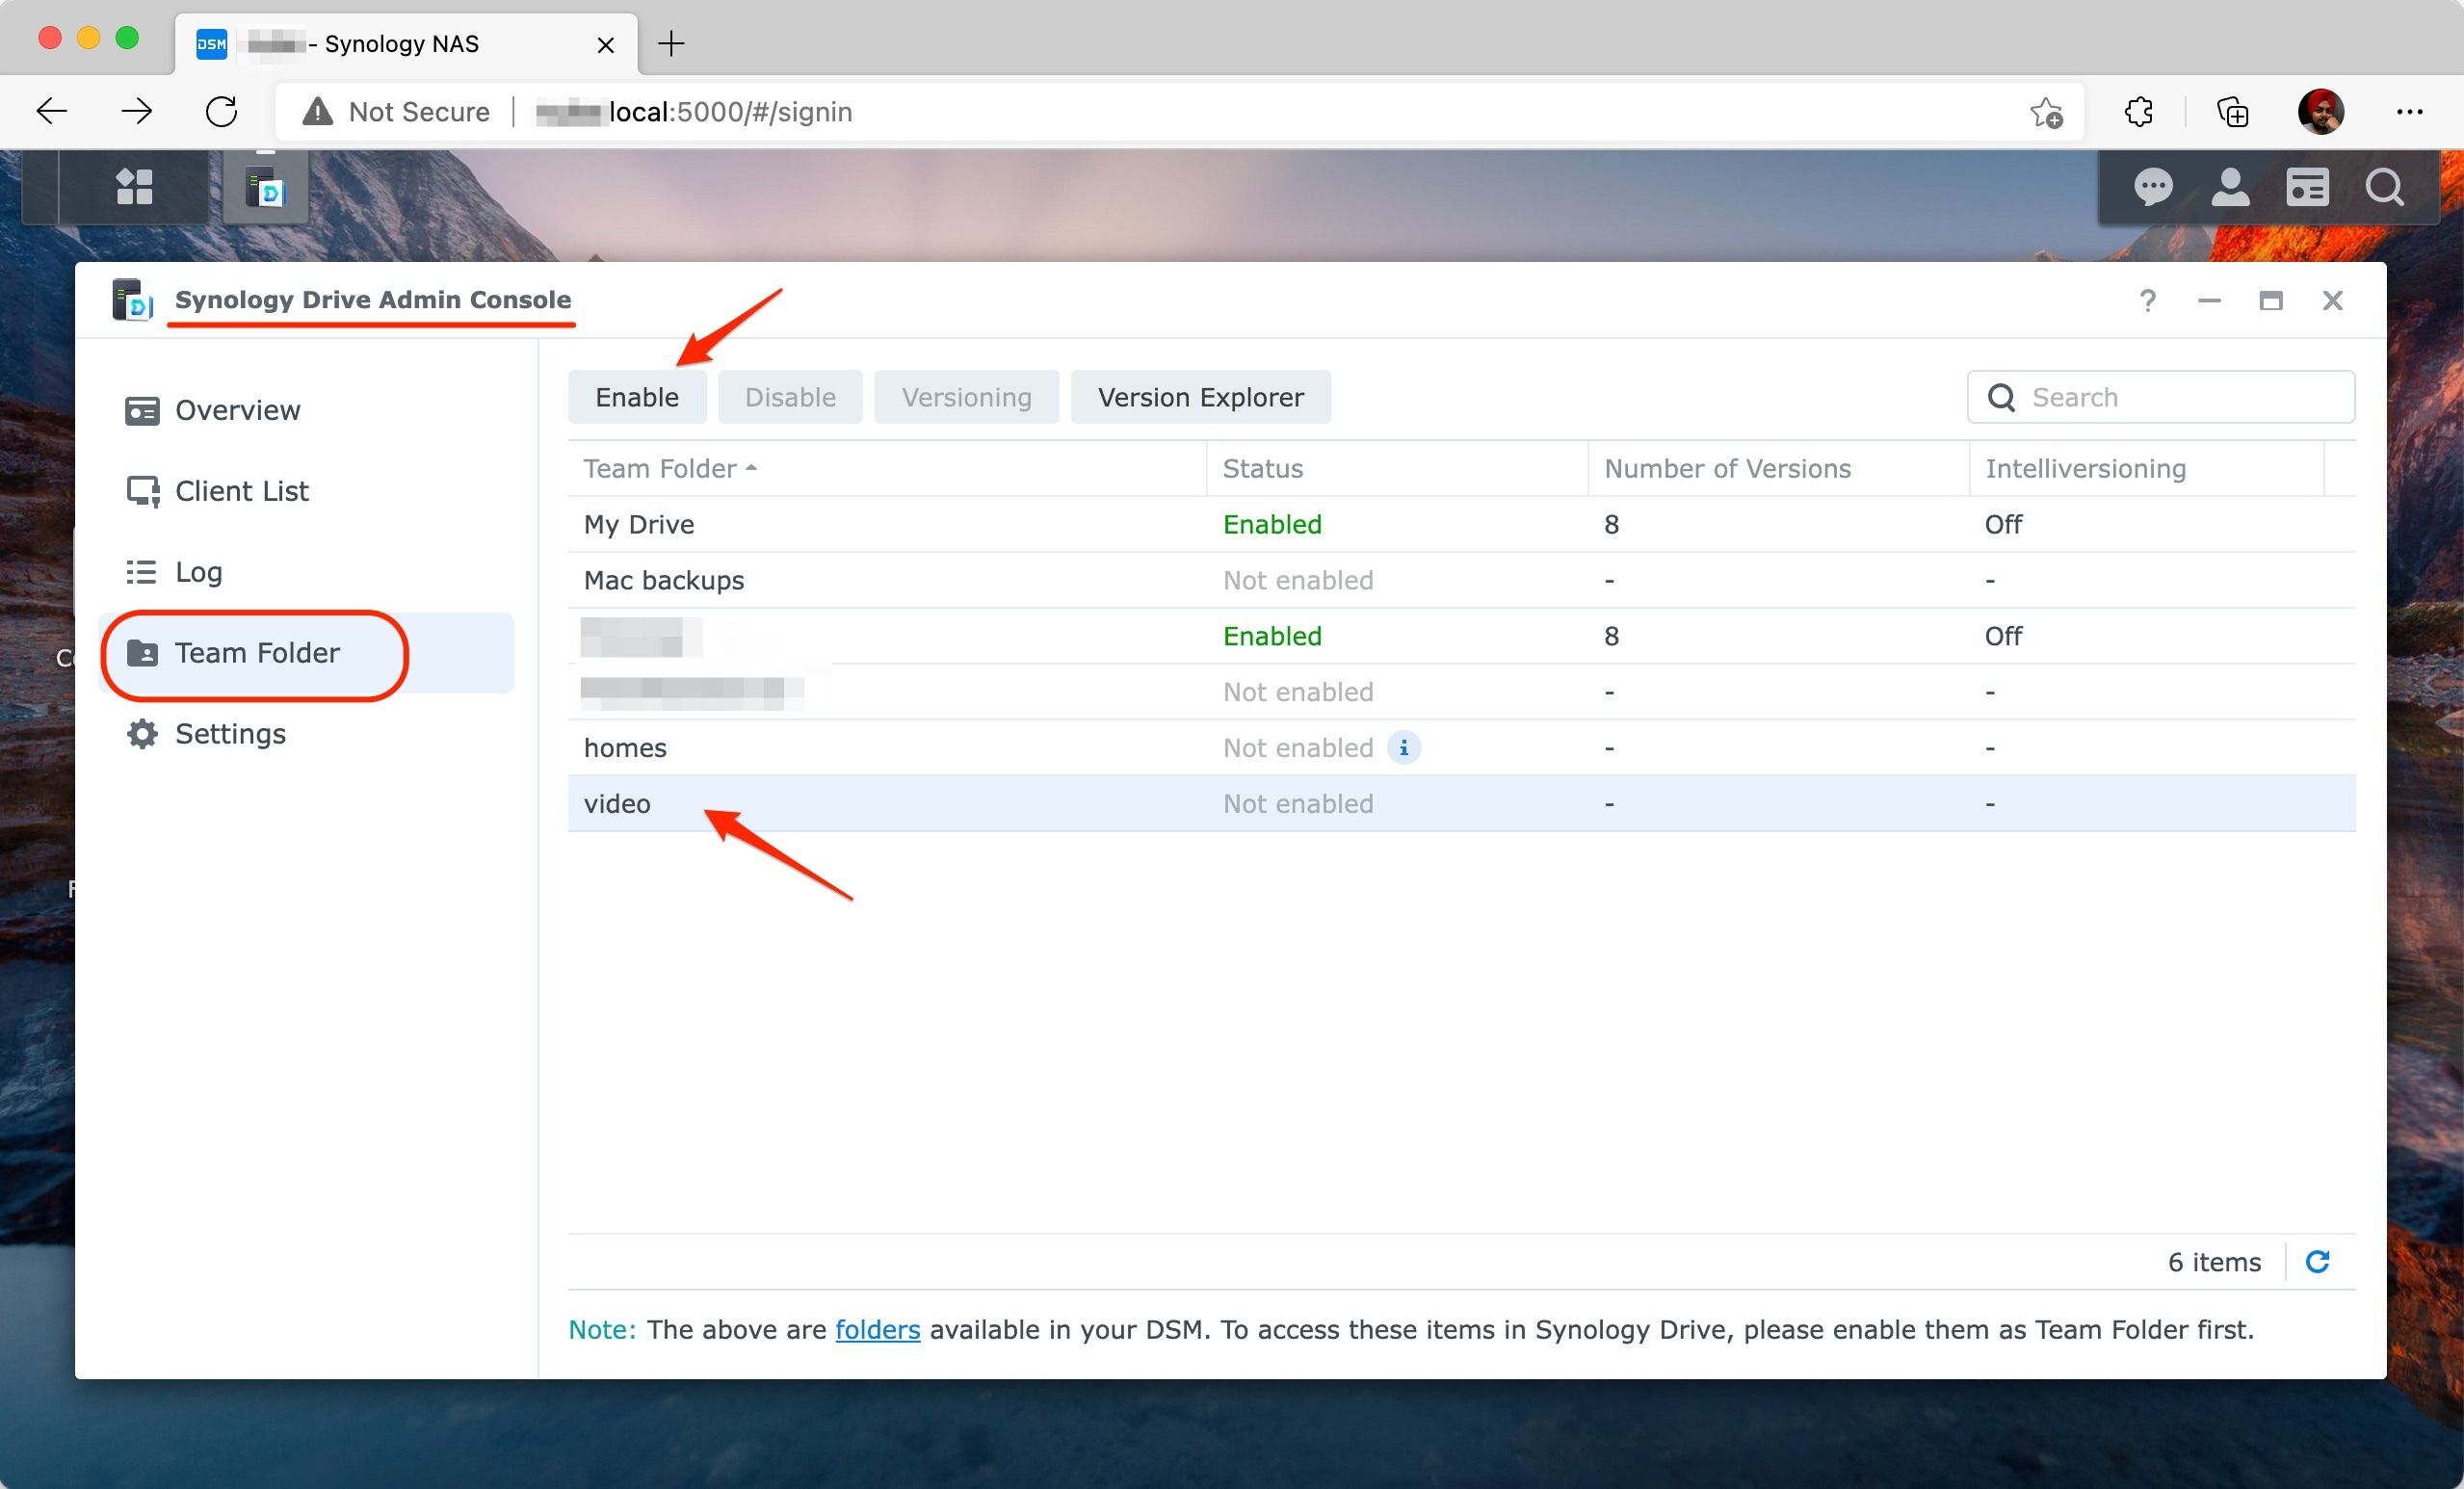 Screenshot shows the Synology Drive Admin Console pop up with arrows ponting to 'Team Folder', 'Enable', and 'video'.